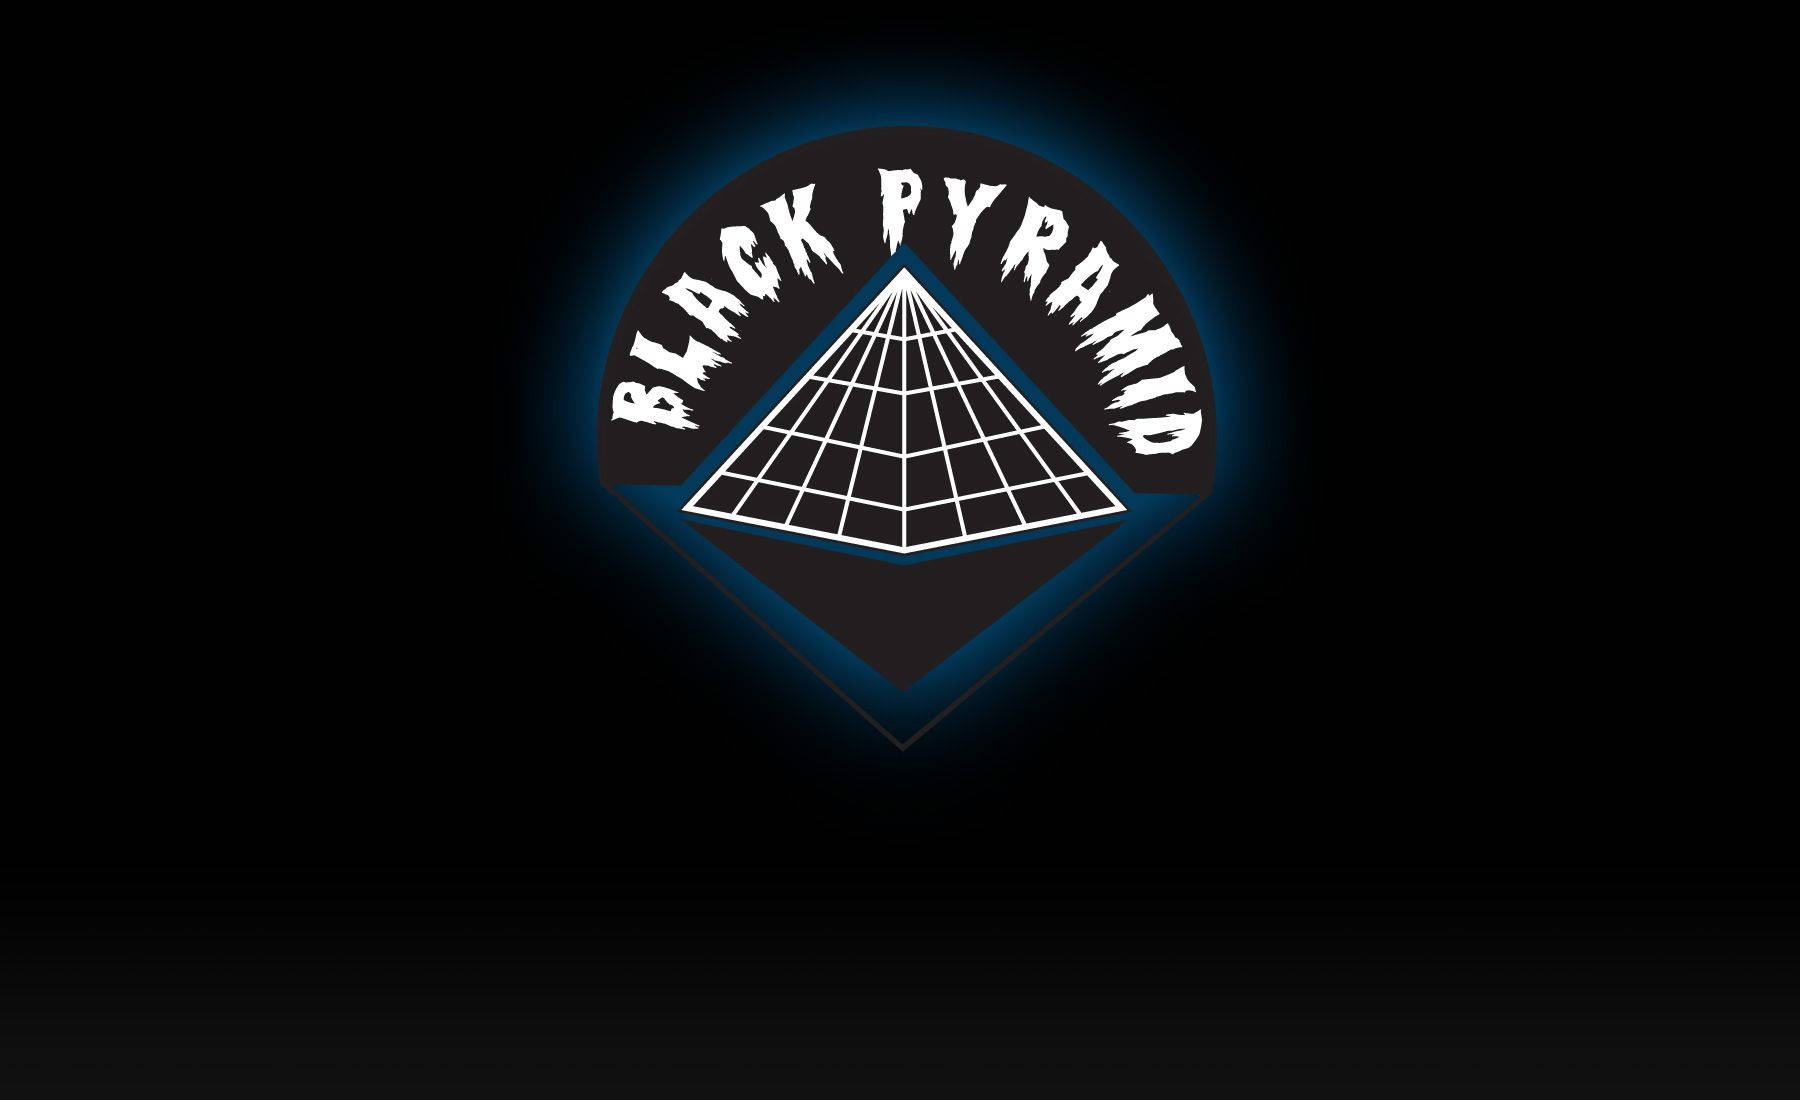 Caption: Captivating Black Pyramid With White Gridlines Wallpaper